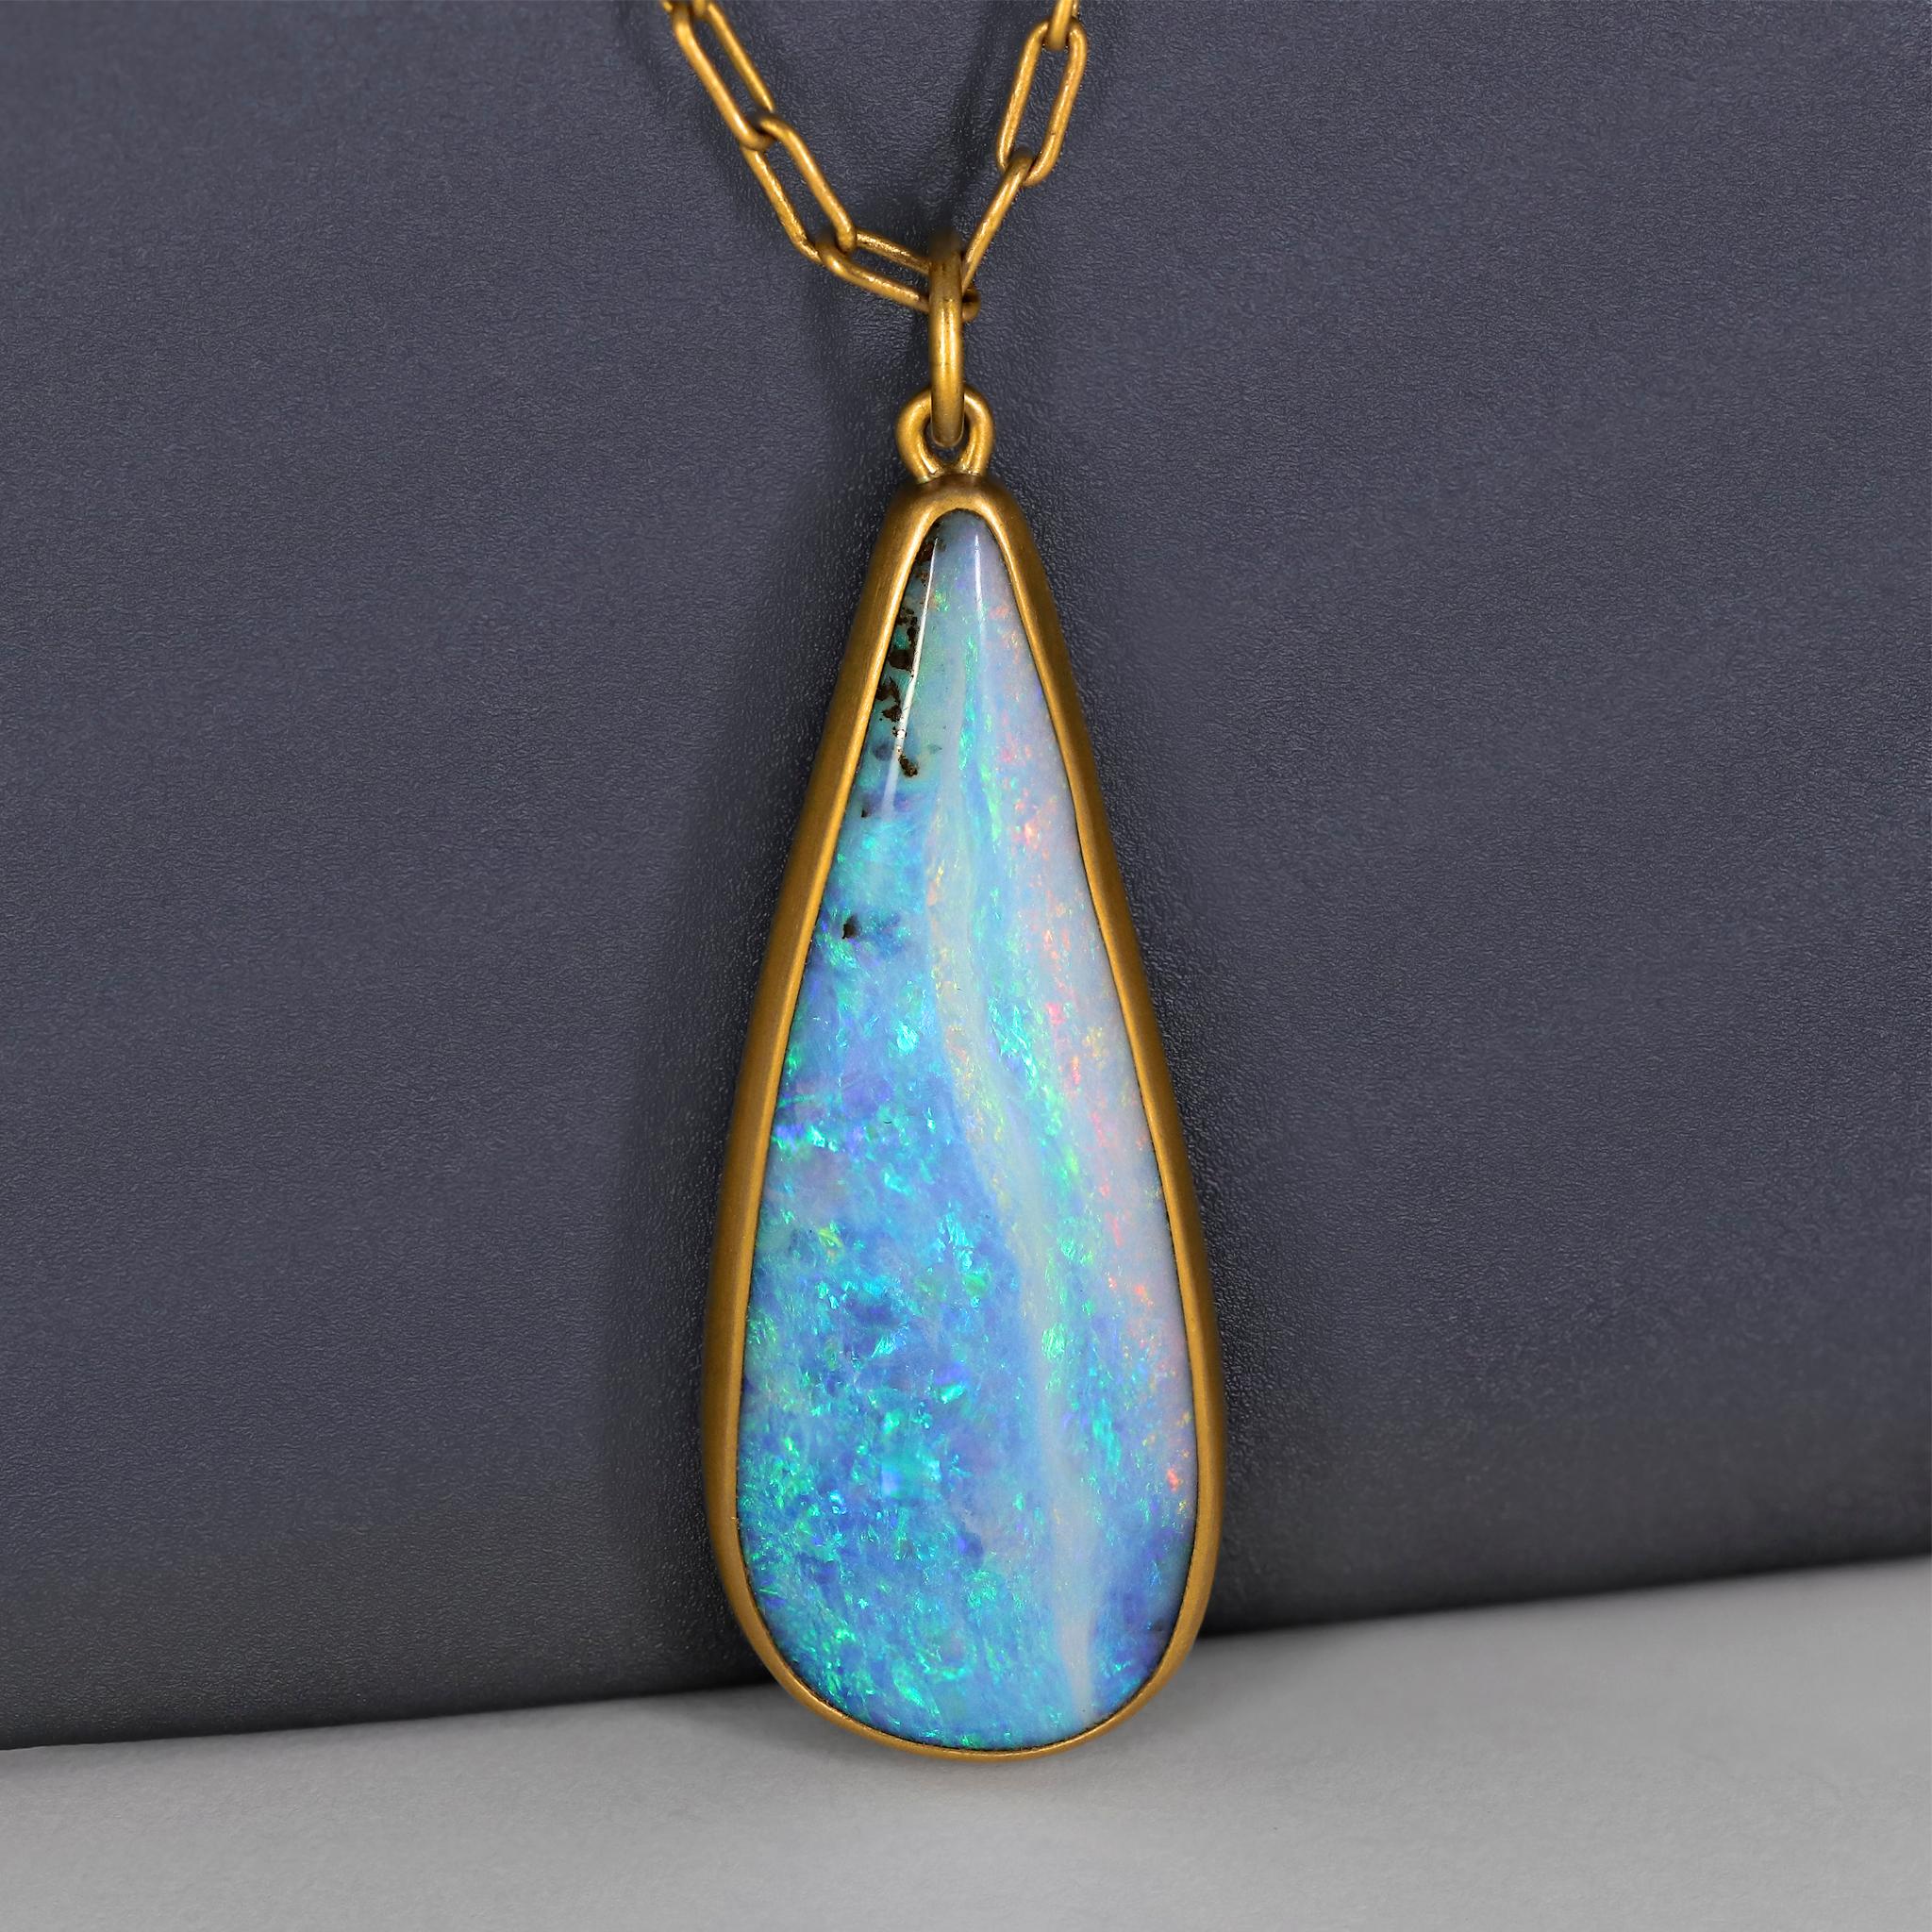 One of a Kind Necklace by jewelry maker Lola Brooks hand-fabricated in matte-finished 22k yellow gold featuring an extraordinary, rare 52.38 carat tear drop shaped blue boulder opal with phenomenal rainbow fire color play, bezel-set and finished on